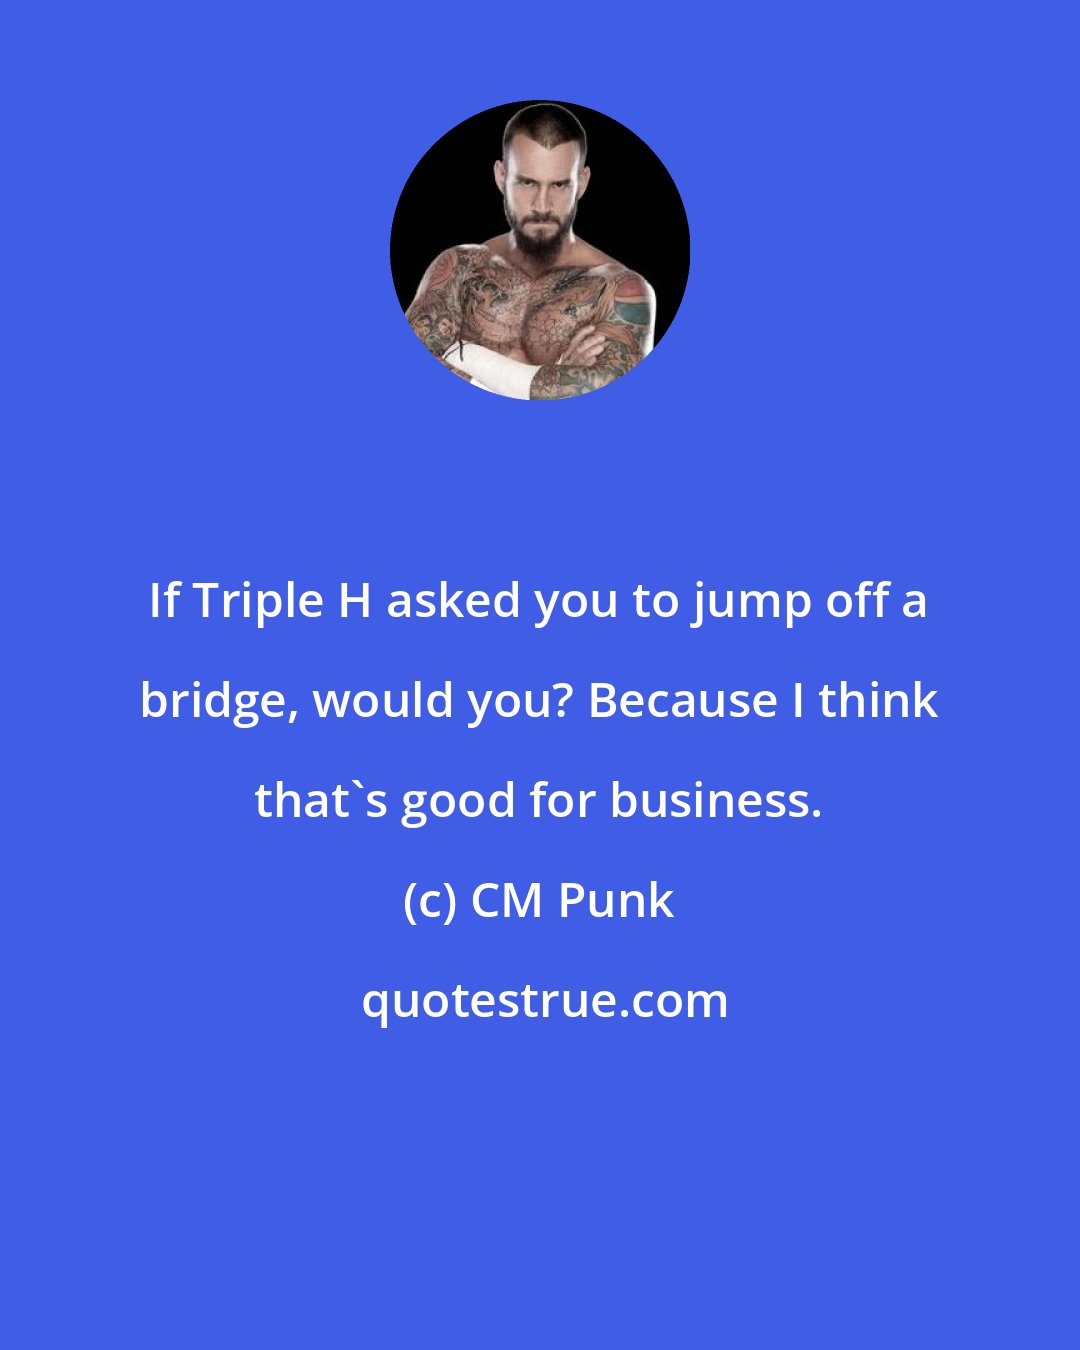 CM Punk: If Triple H asked you to jump off a bridge, would you? Because I think that's good for business.